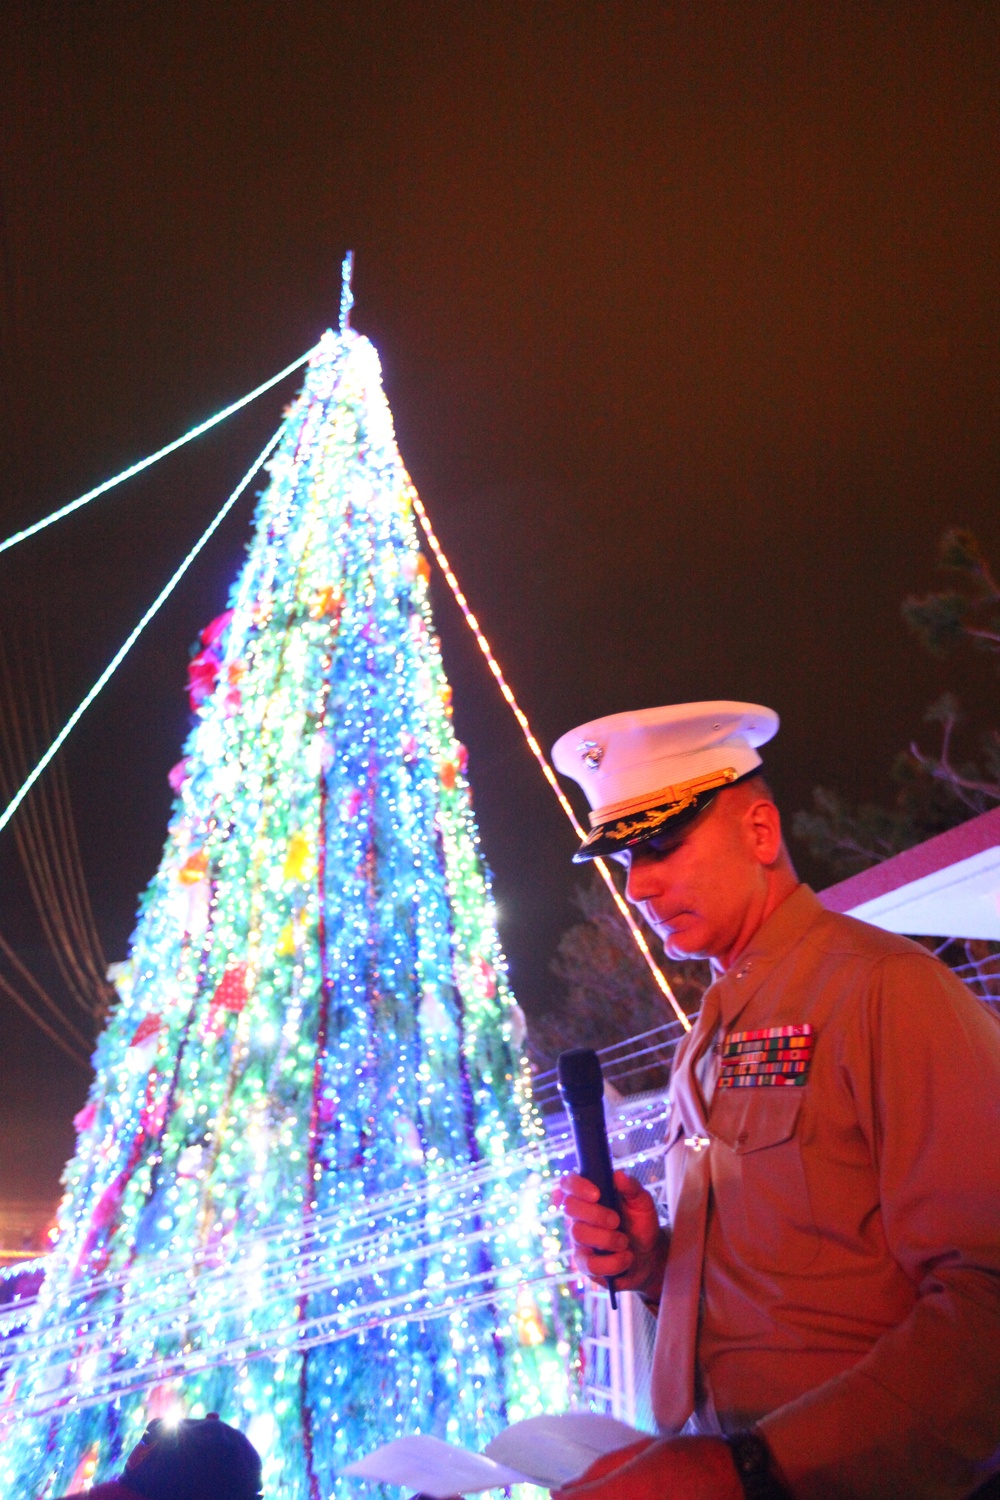 Marines join with Okinawa locals to light up season